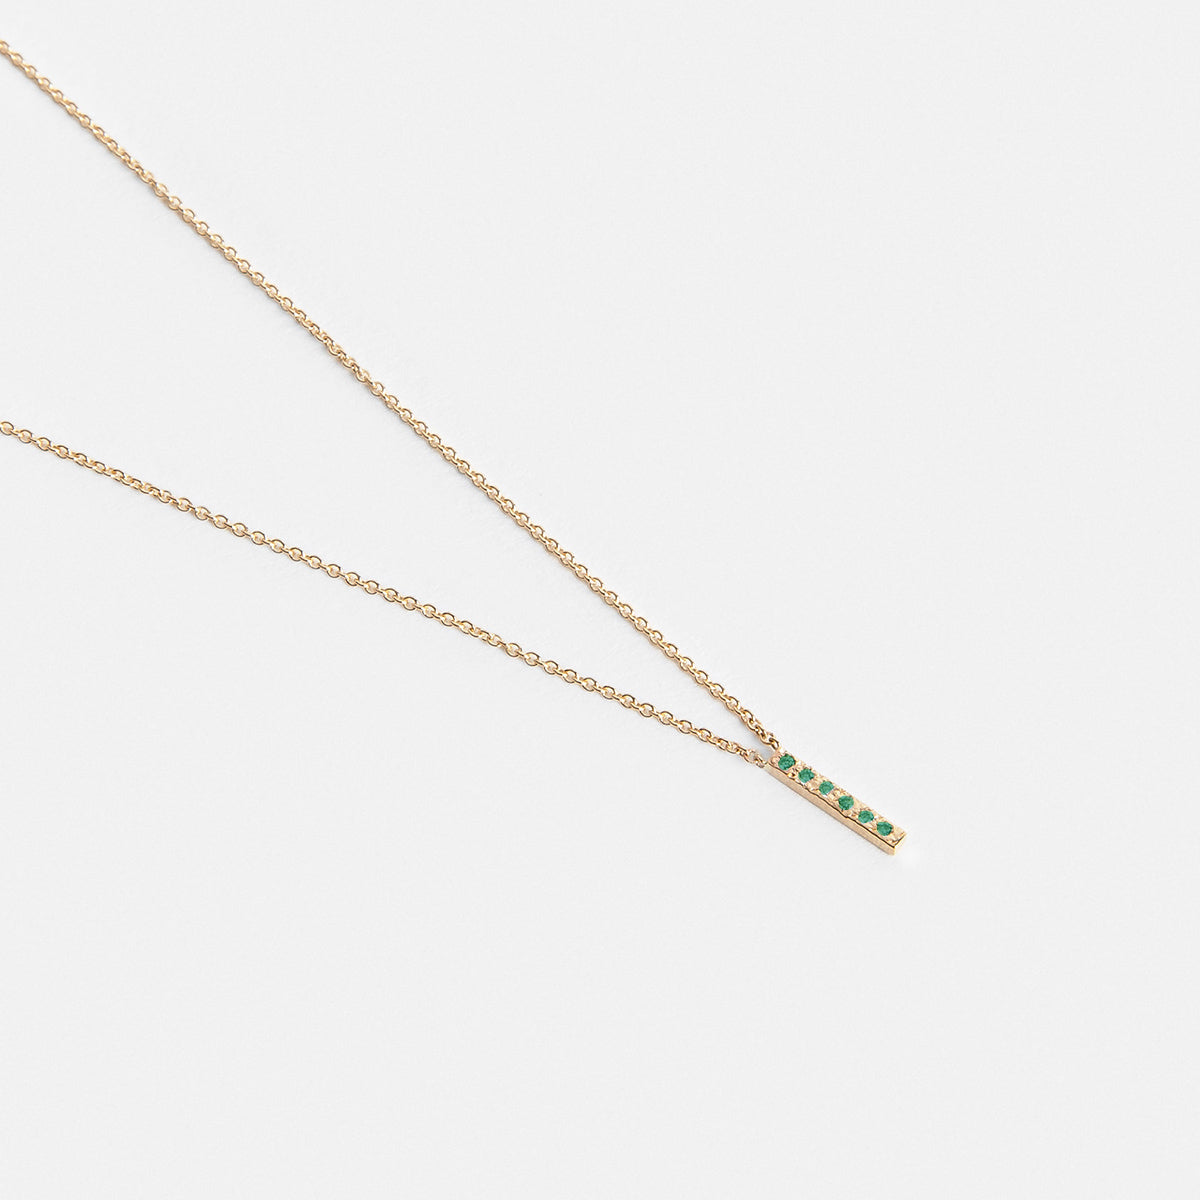 Mini Tiru Delicate Necklace in 14k Gold set with Emeralds By SHW Fine Jewelry NYC